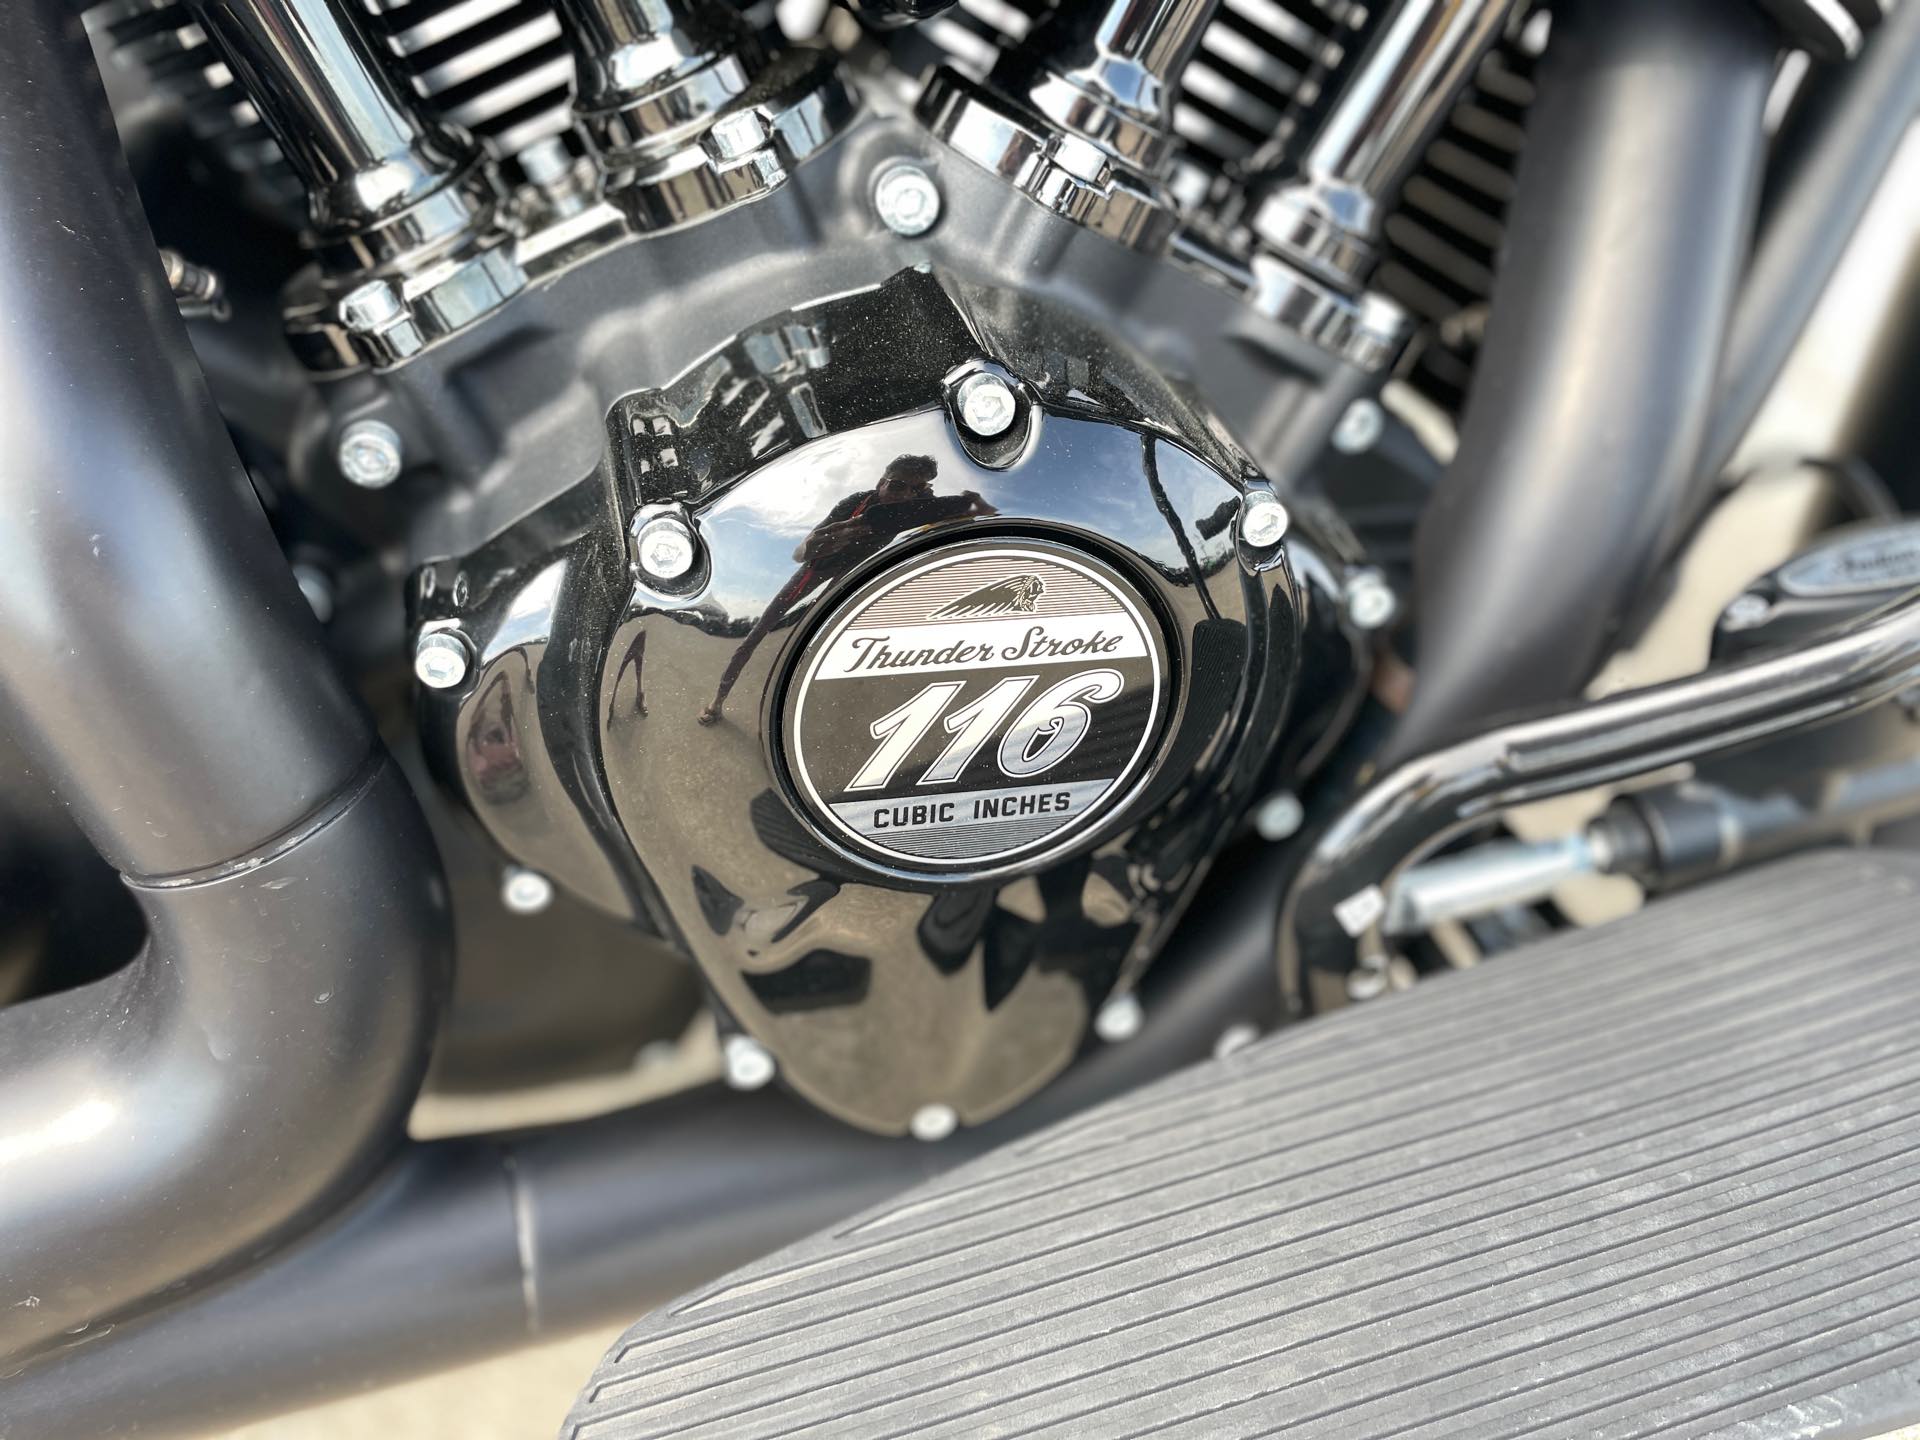 2019 Indian Chieftain Dark Horse at Head Indian Motorcycle